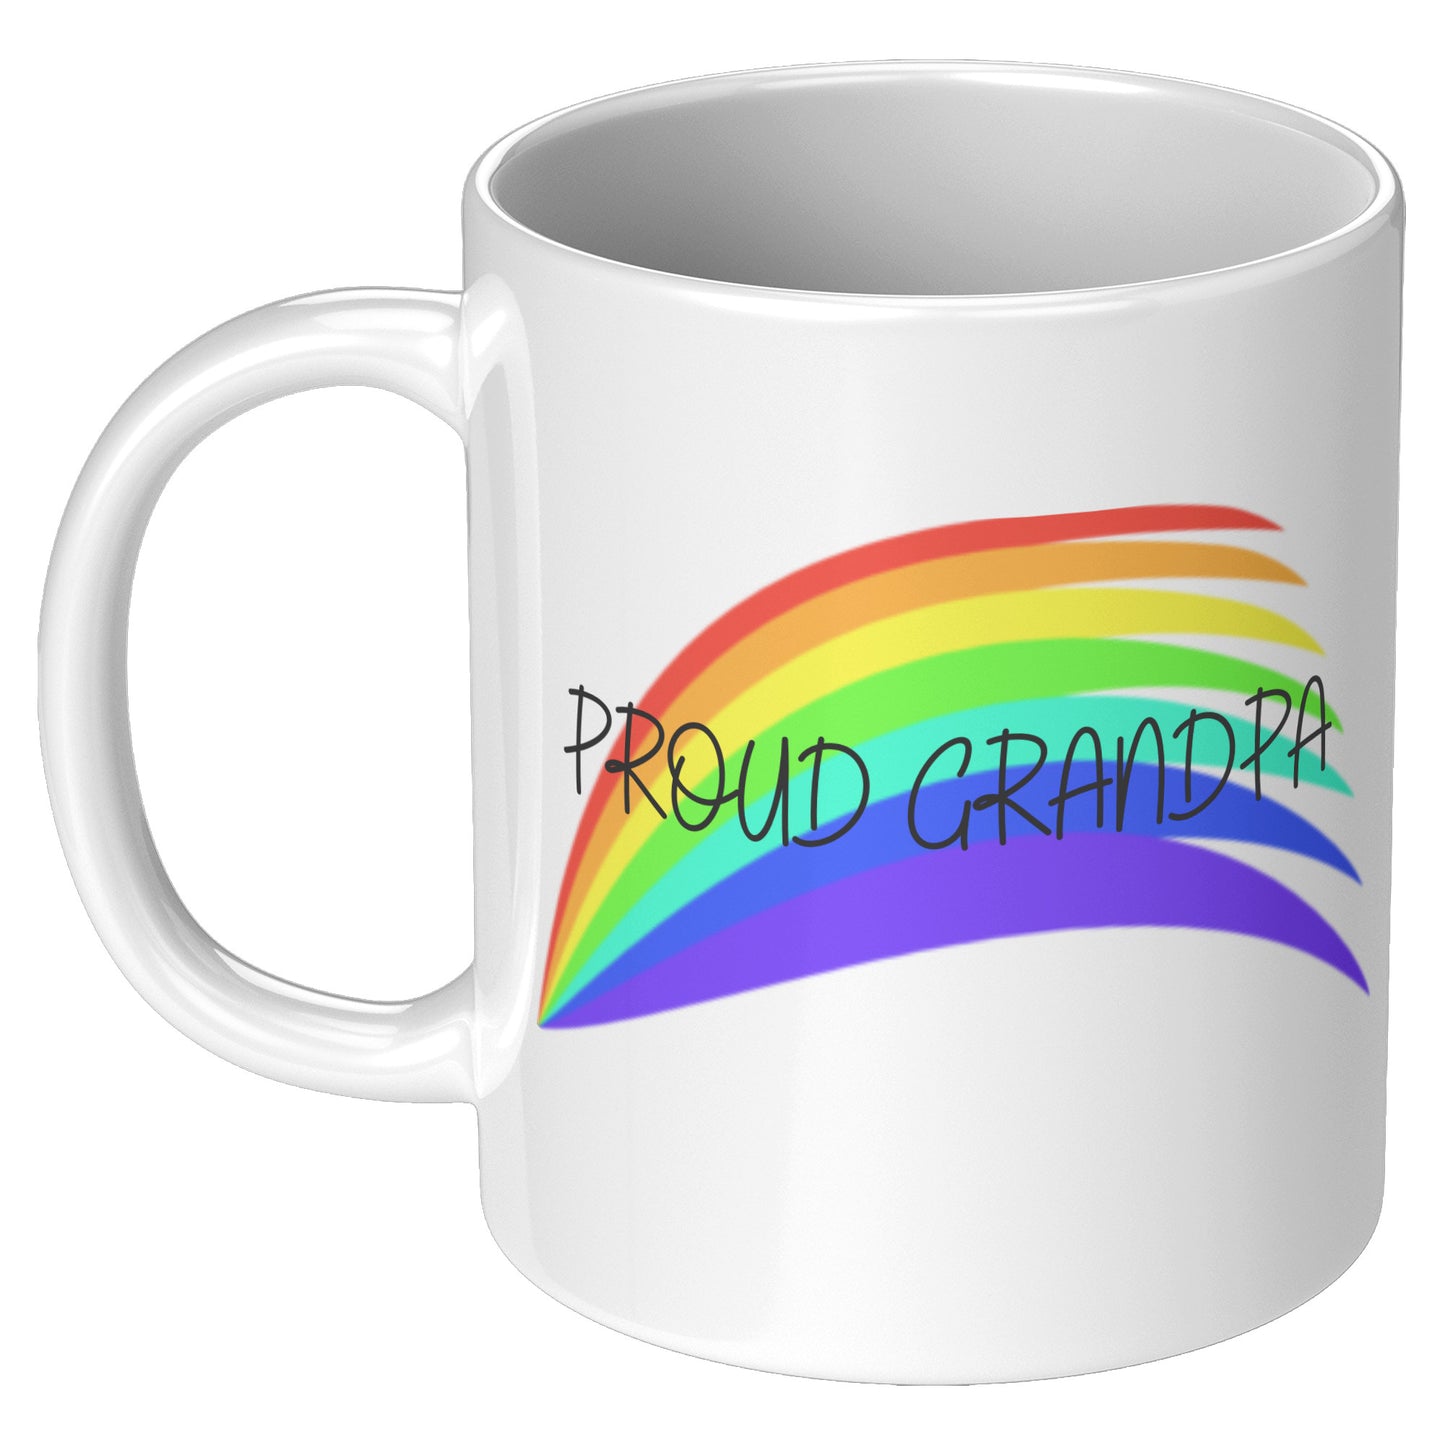 LGBTQ+ Pride Rainbow Mug For Grandpa To Support Your Loved Ones, White With Colourful Design